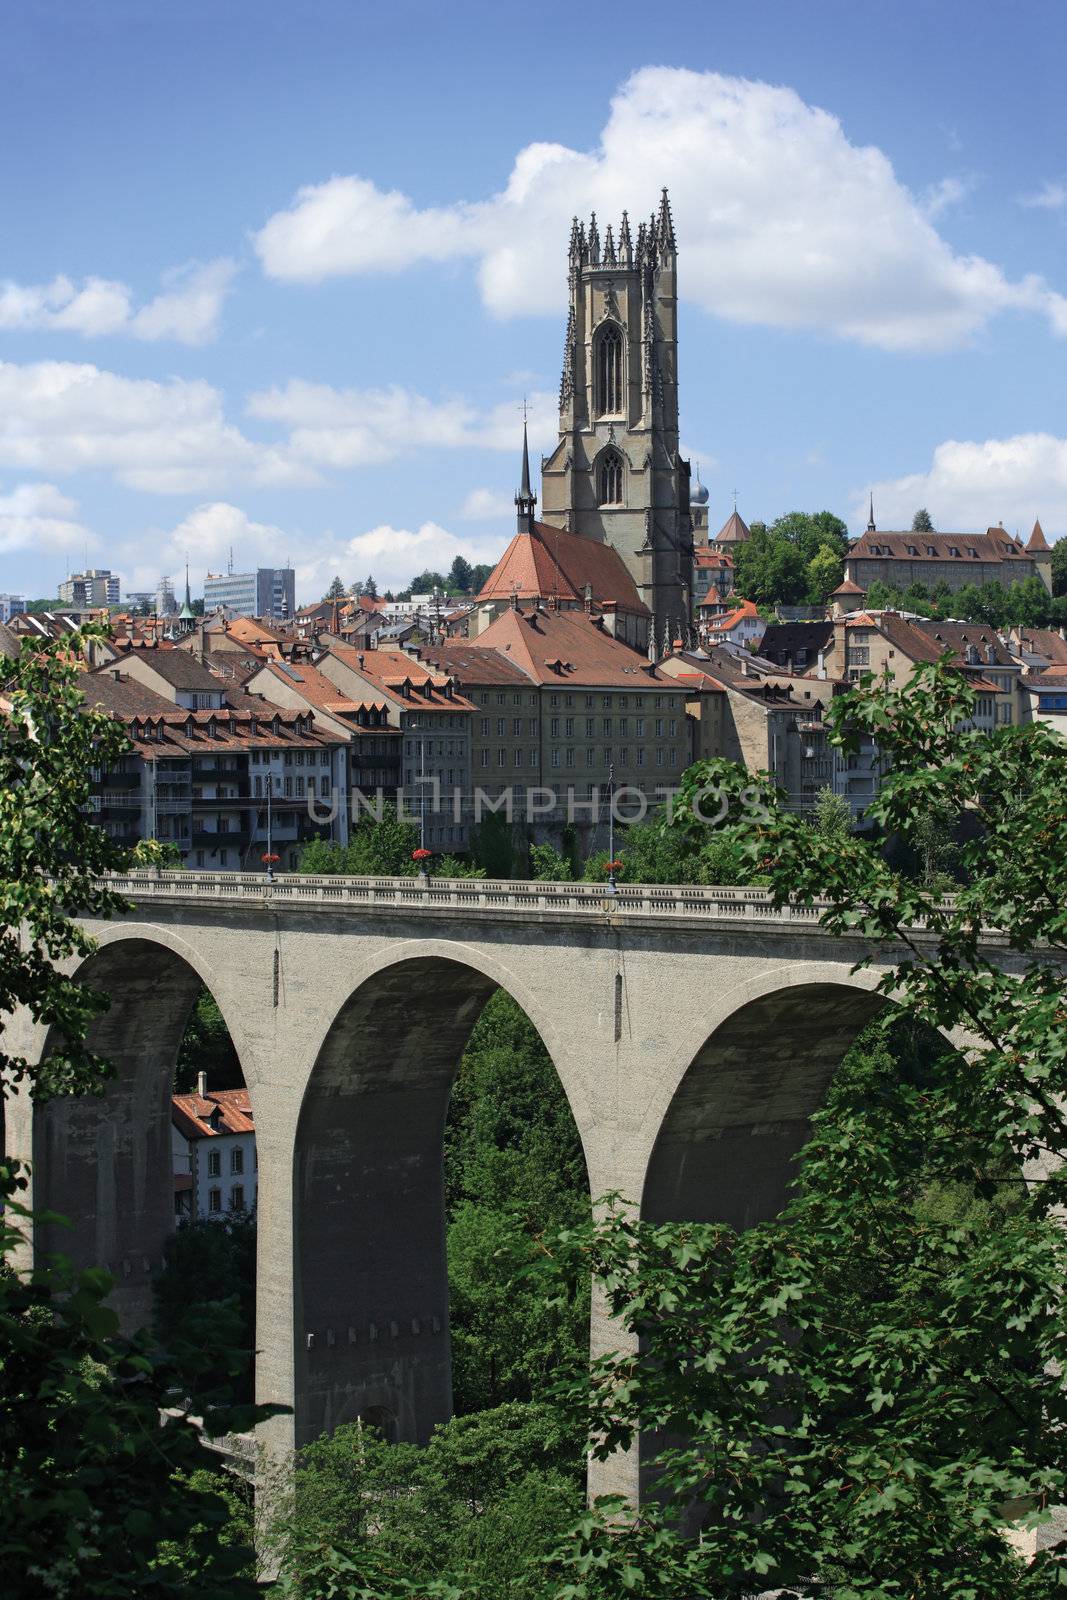 Photo of the bridge and church tower from the city of Fribourg in Switzerland.